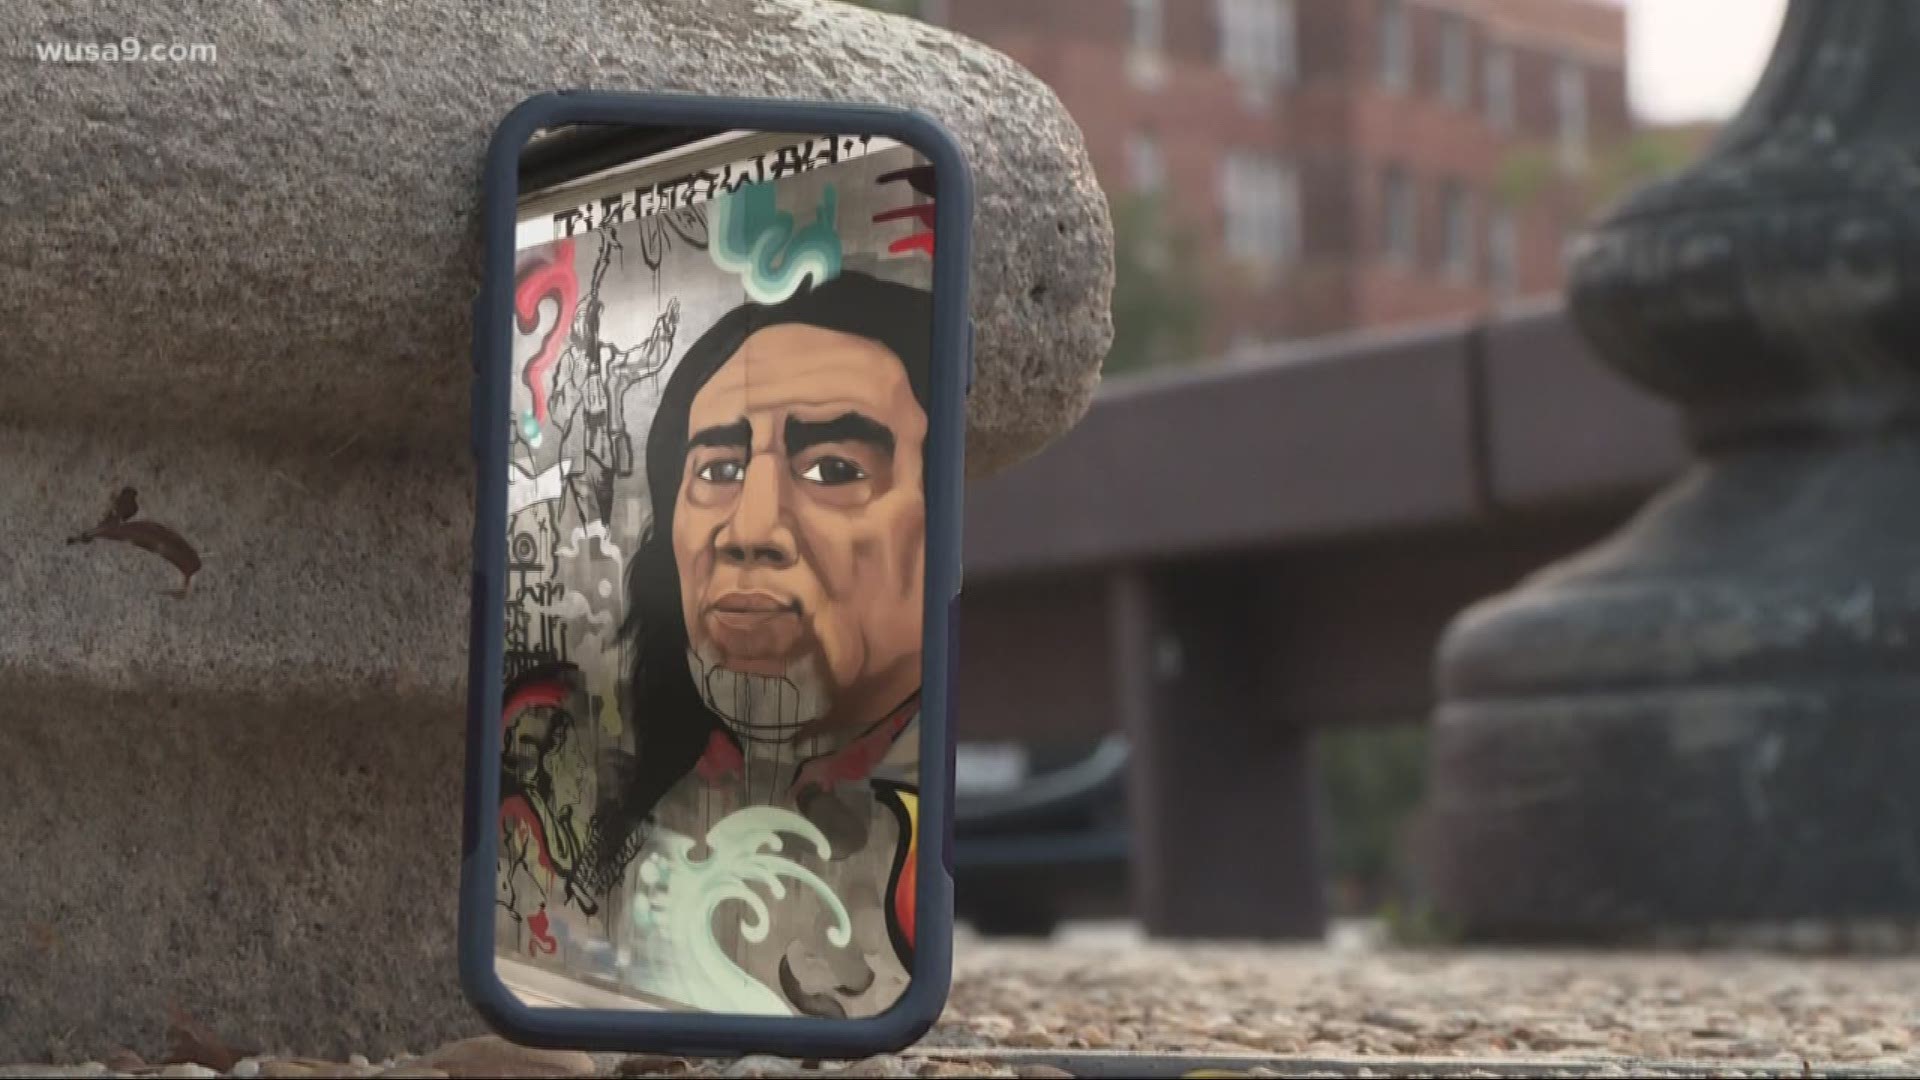 Developed by George Washington University, the app walks users through 17 sites important to the Native American story - from murals to museums.